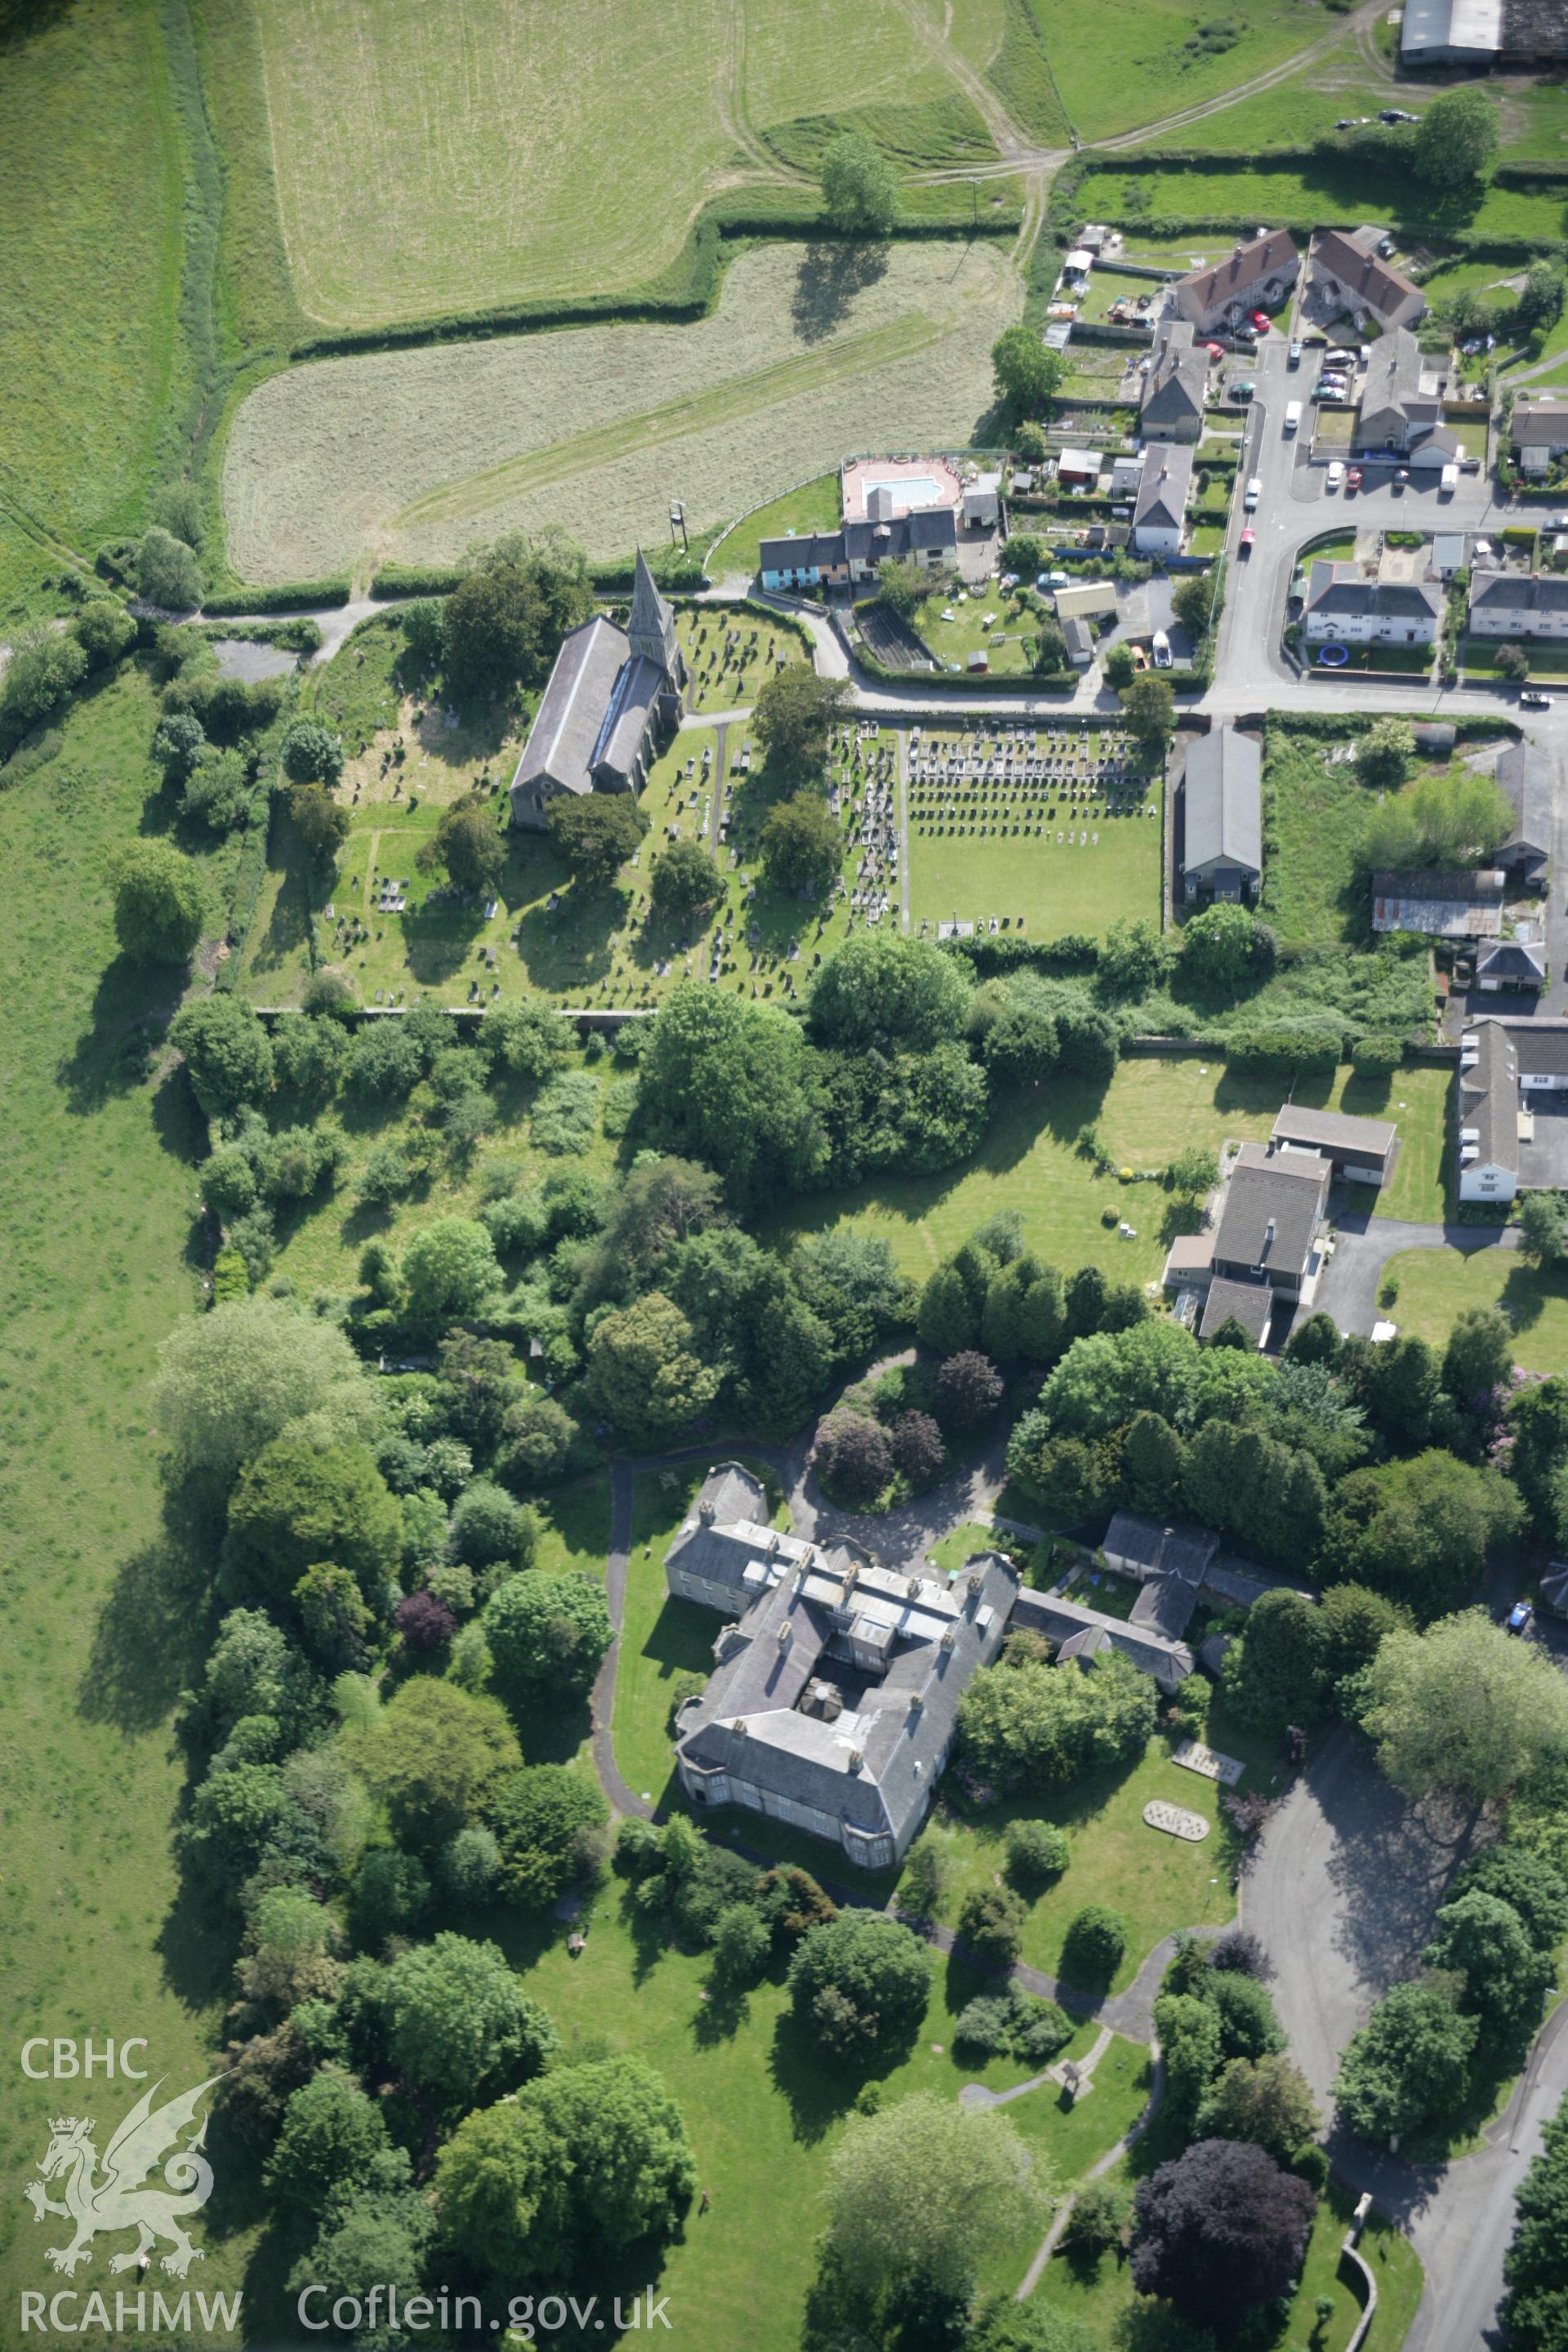 RCAHMW colour oblique aerial photograph of the College of Saints Maurice & Thomas, Abergwili, later The Bishop's Palace, and now Carmarthenshire Museum. Taken on 09 June 2005 by Toby Driver